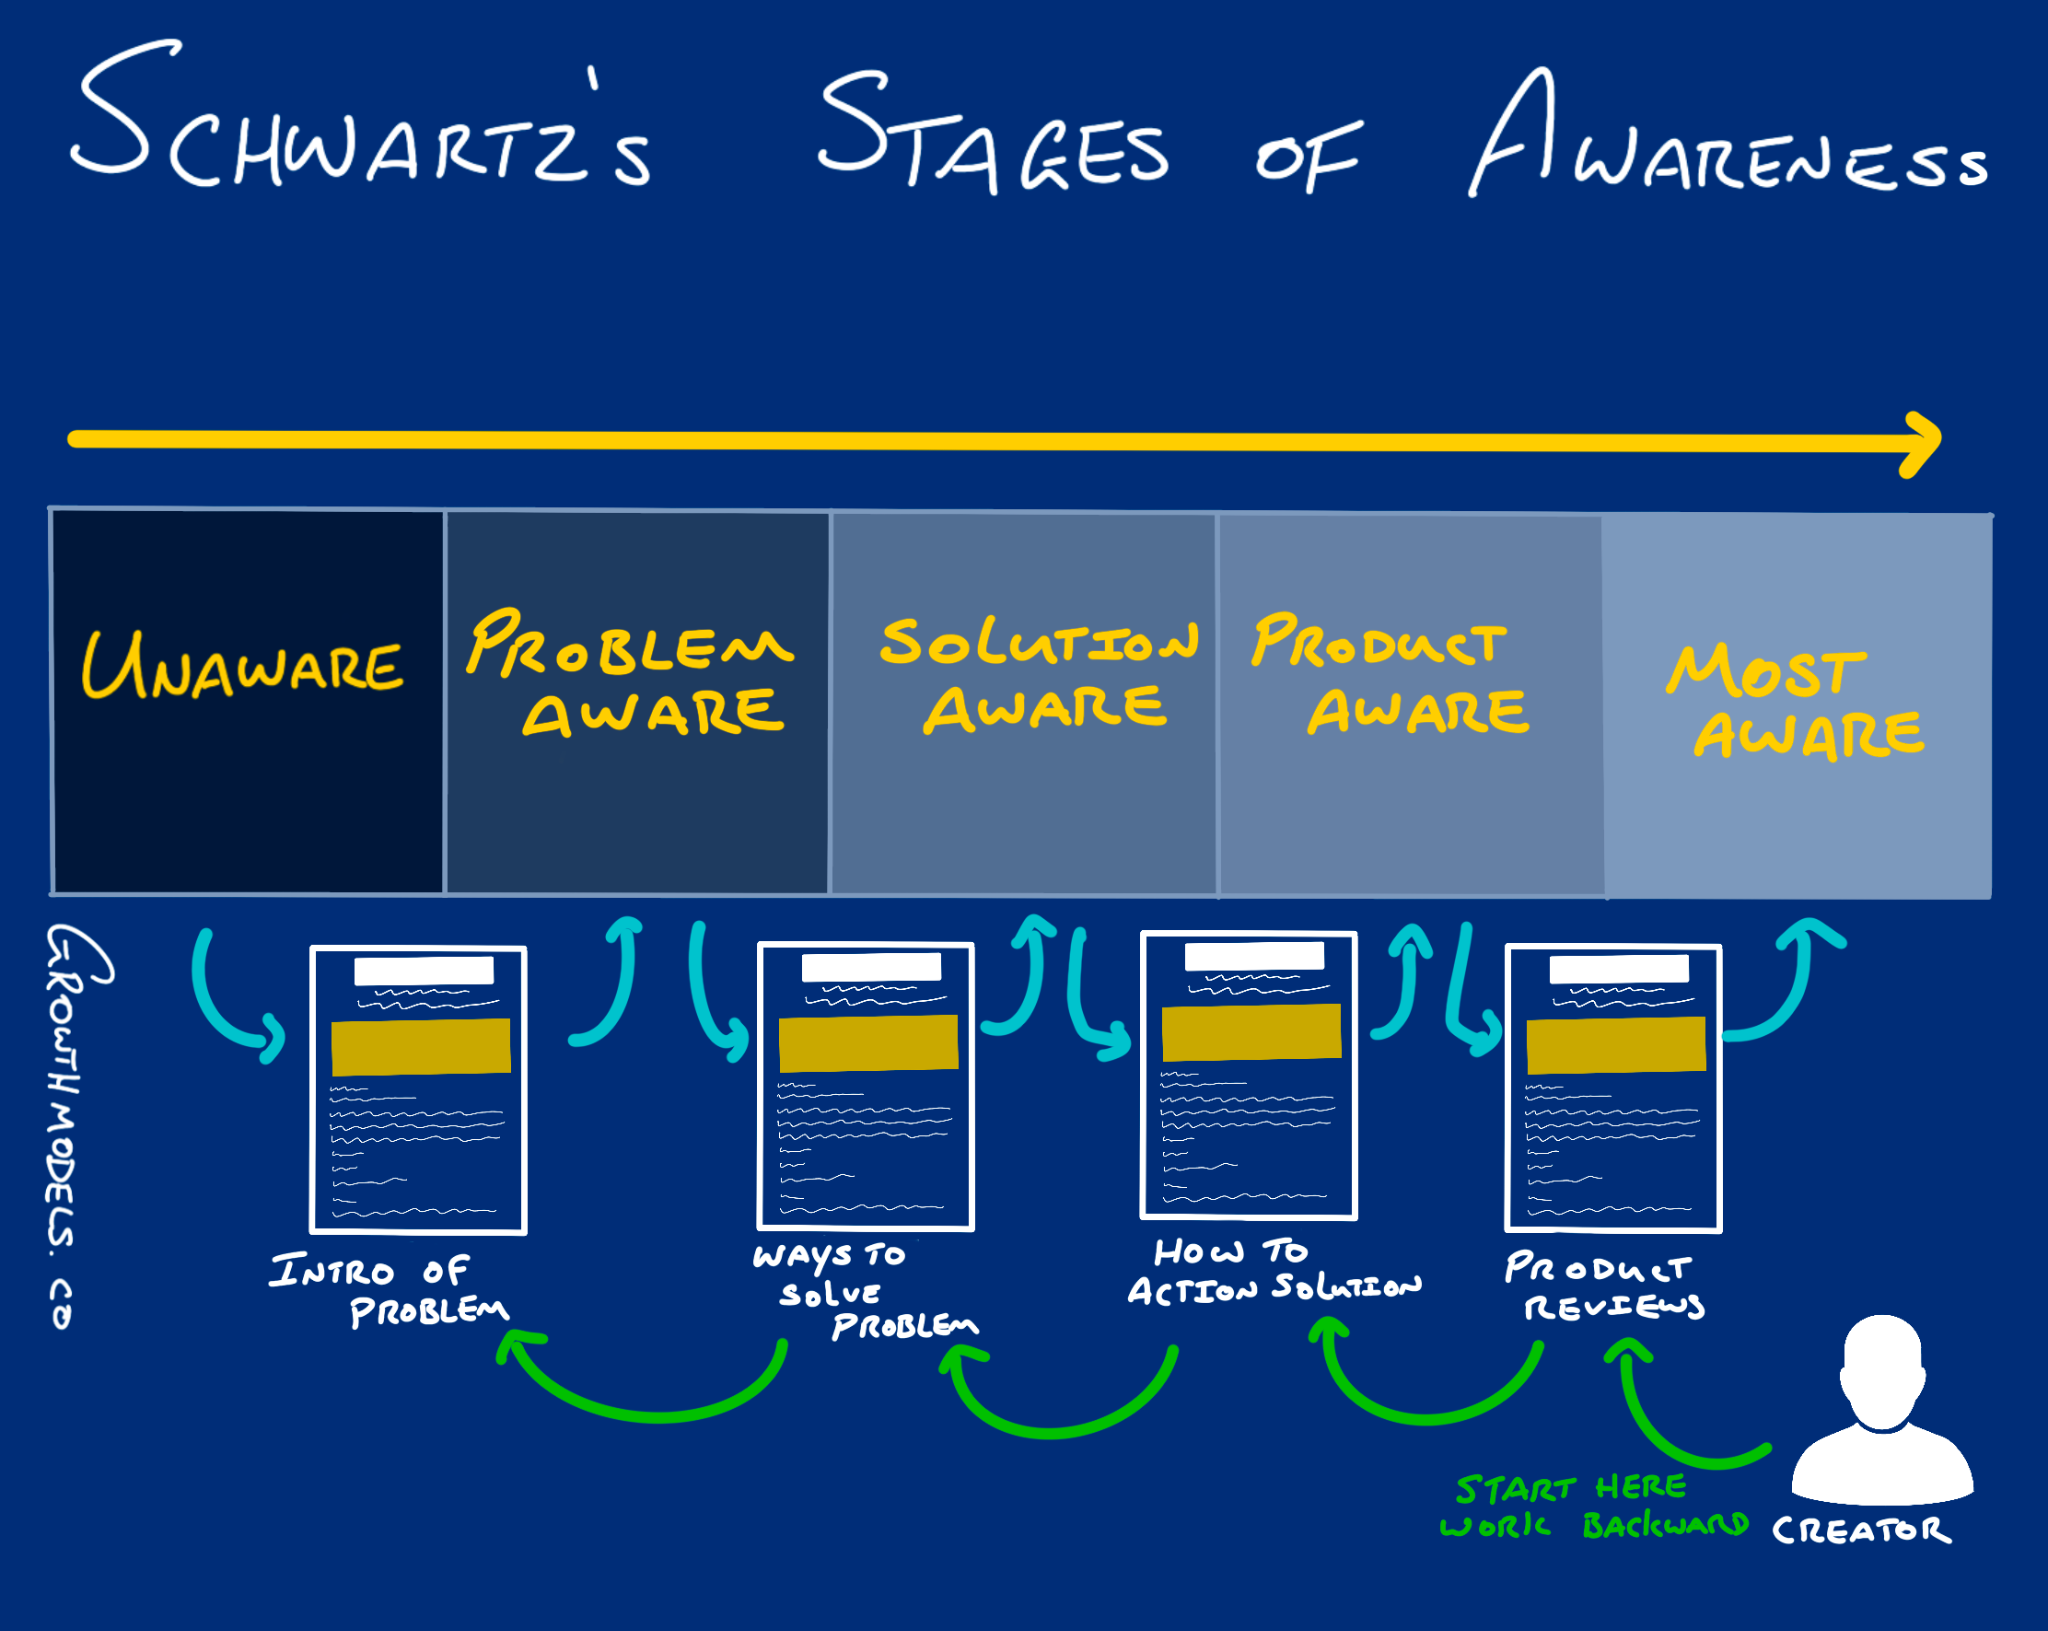 Stages of awareness and the best articles for each stage